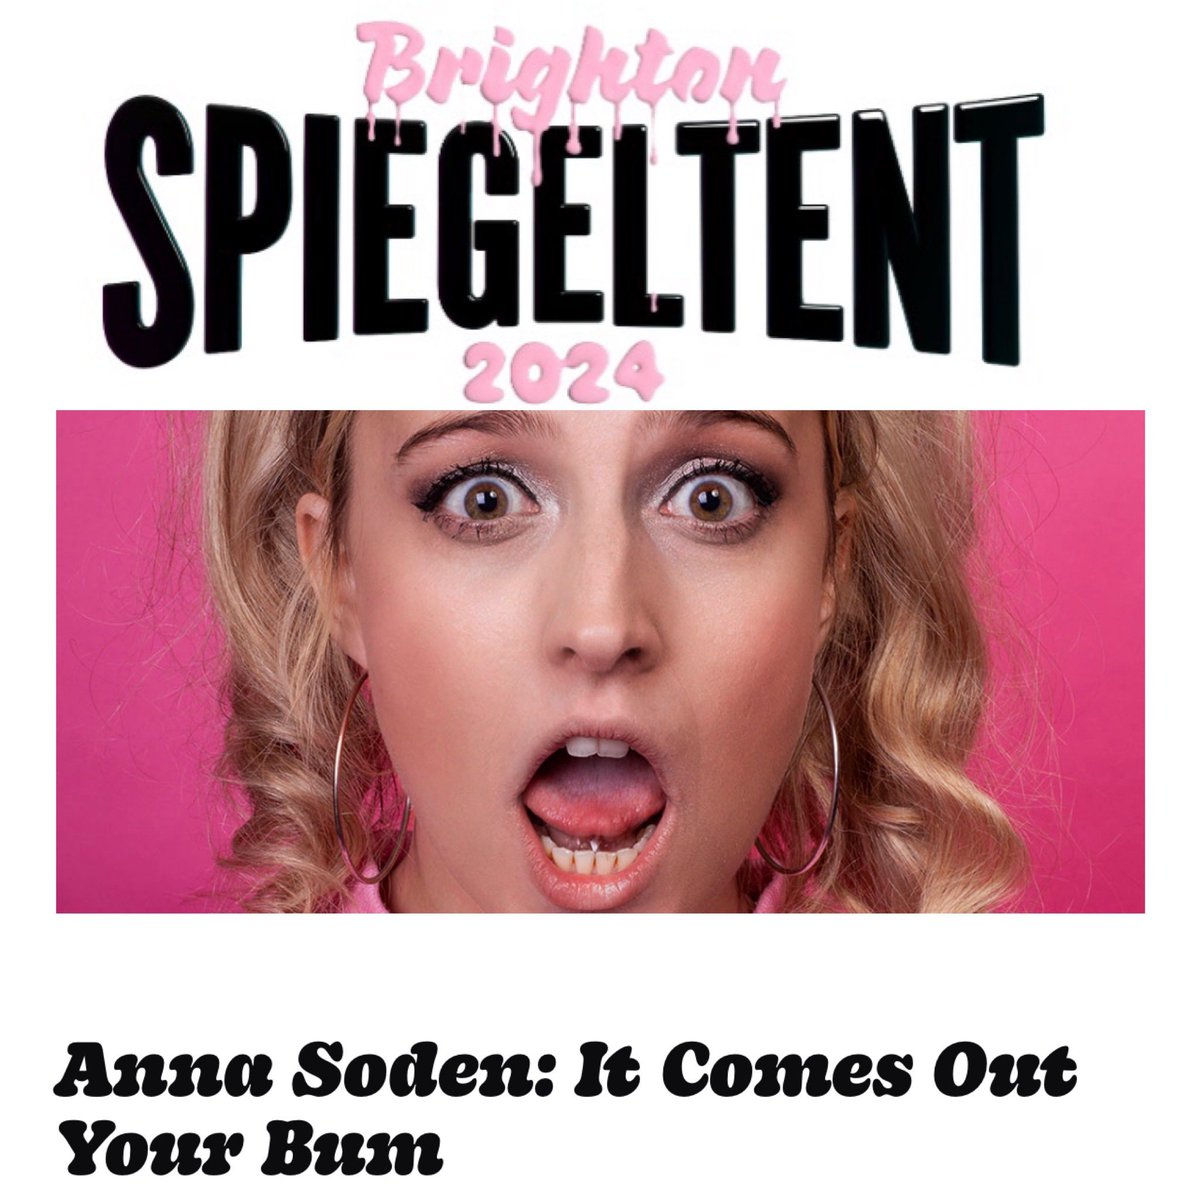 💘🌸🎀🚽BRIGHTON! I’m doing my show in you at @BSpiegeltent on MAY 15th!💘🌸🎀🧻 Come see IT COMES OUT YOUR BUM for the most silly and outrageously fun and most best comedy show of your life ever. EVER. 🎟tickets.brightonspiegeltent.com/events/57c3e67…